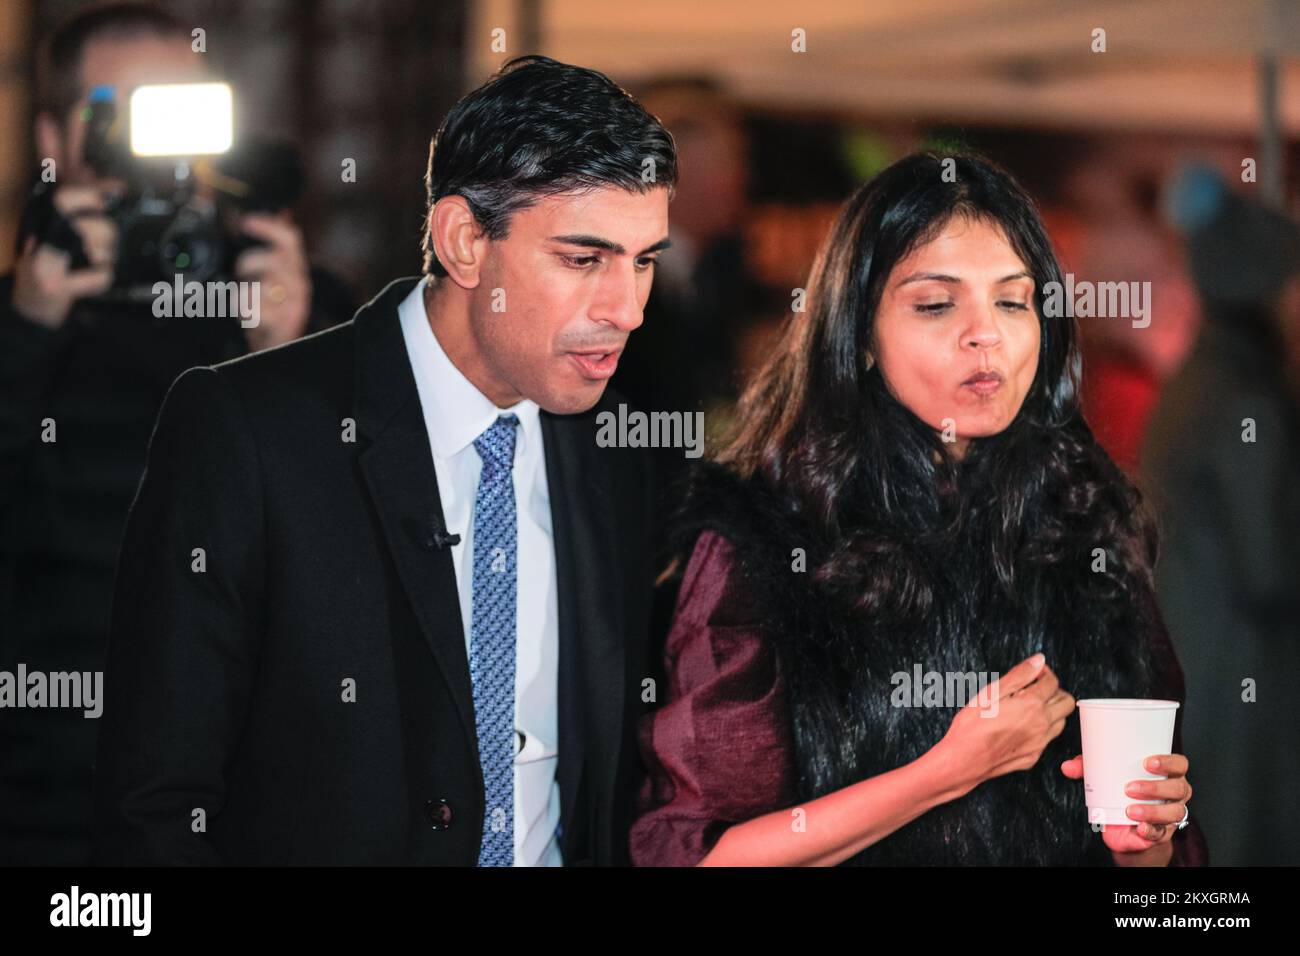 London, UK. 30th Nov, 2022. Rishi Sunak, British Prime Minister, attends the annual festive UK Food and Drinks market set up in Downing Street with his wife Akshata Murthy. The market is showcasing British businesses. Chancellor Jeremy Hunt and others are also in attendance. Credit: Imageplotter/Alamy Live News Stock Photo